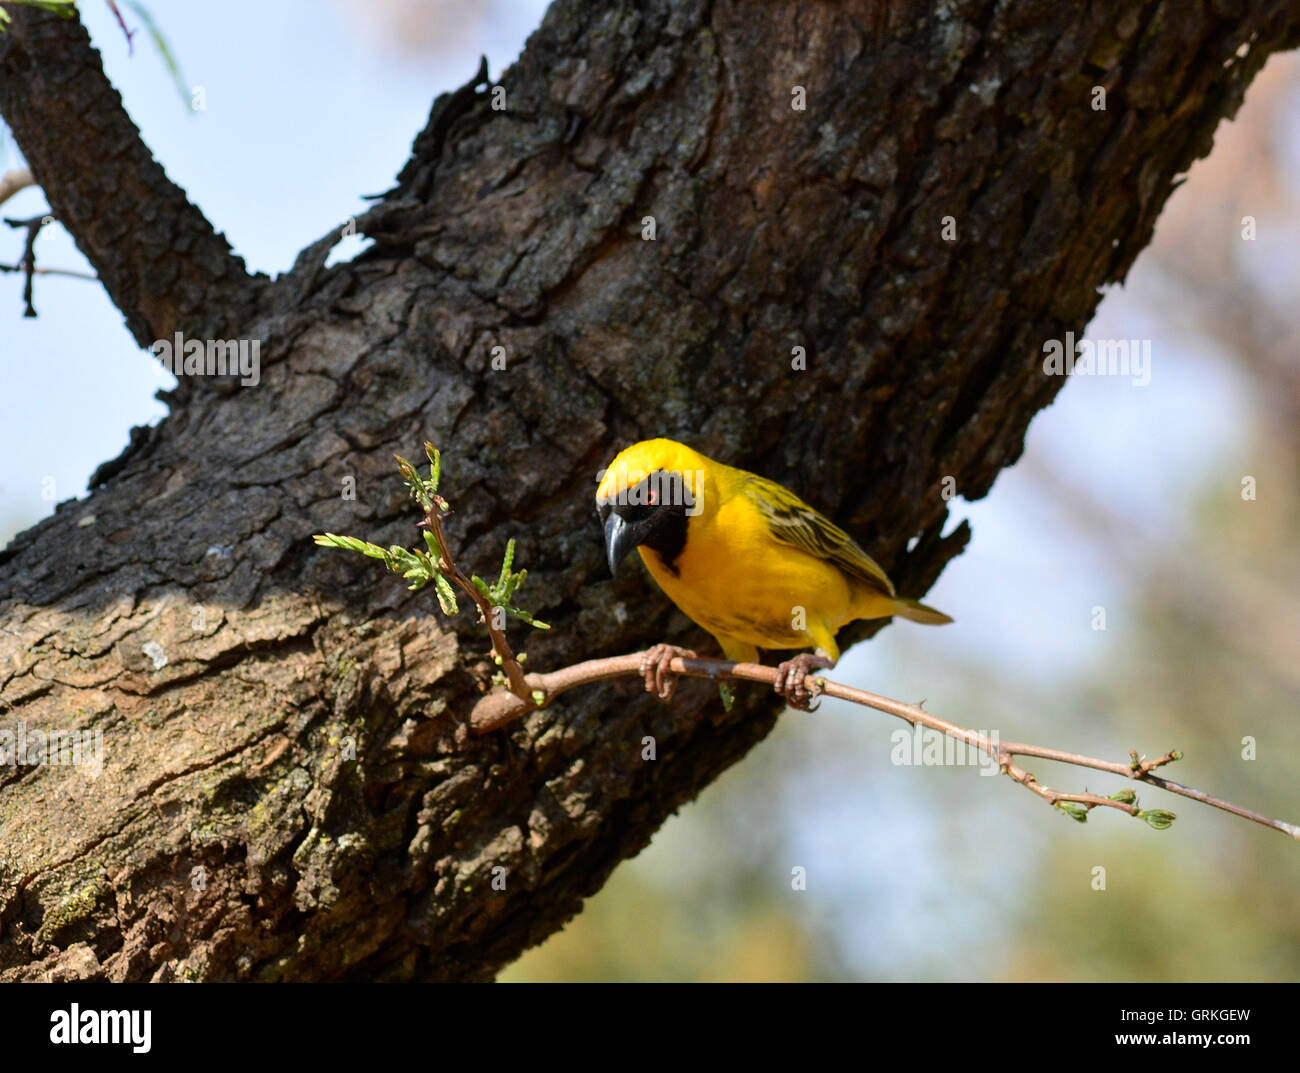 Southern masked weaver (Ploceus velatus) Vivid yellow weaver bird with a black face and red eyes Stock Photo